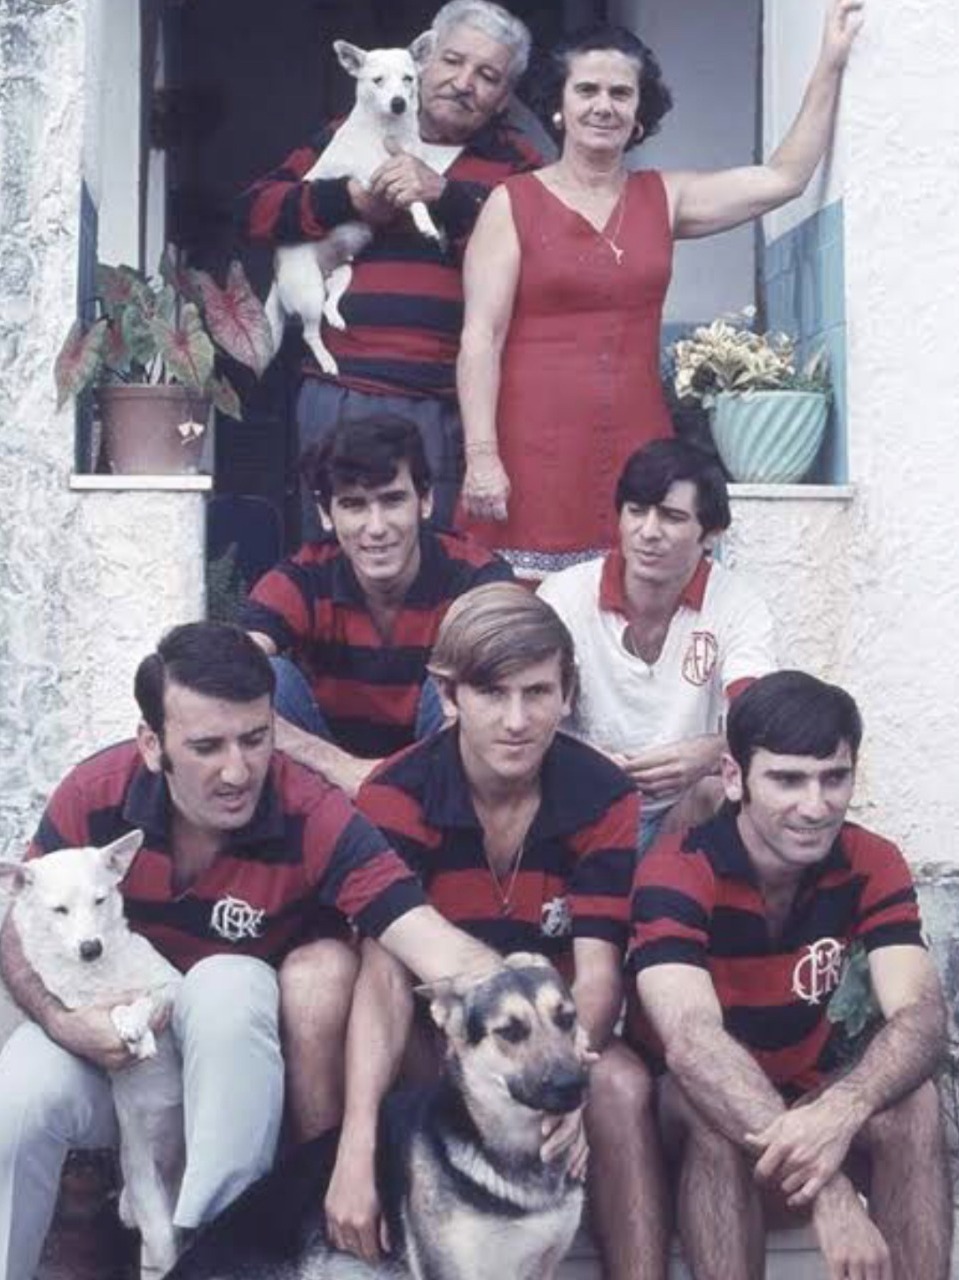 Zico's family: _In the photo: Below, from left to right: Antunes, Zico and Nando.  Above, Antônio and Edu, and their parents.